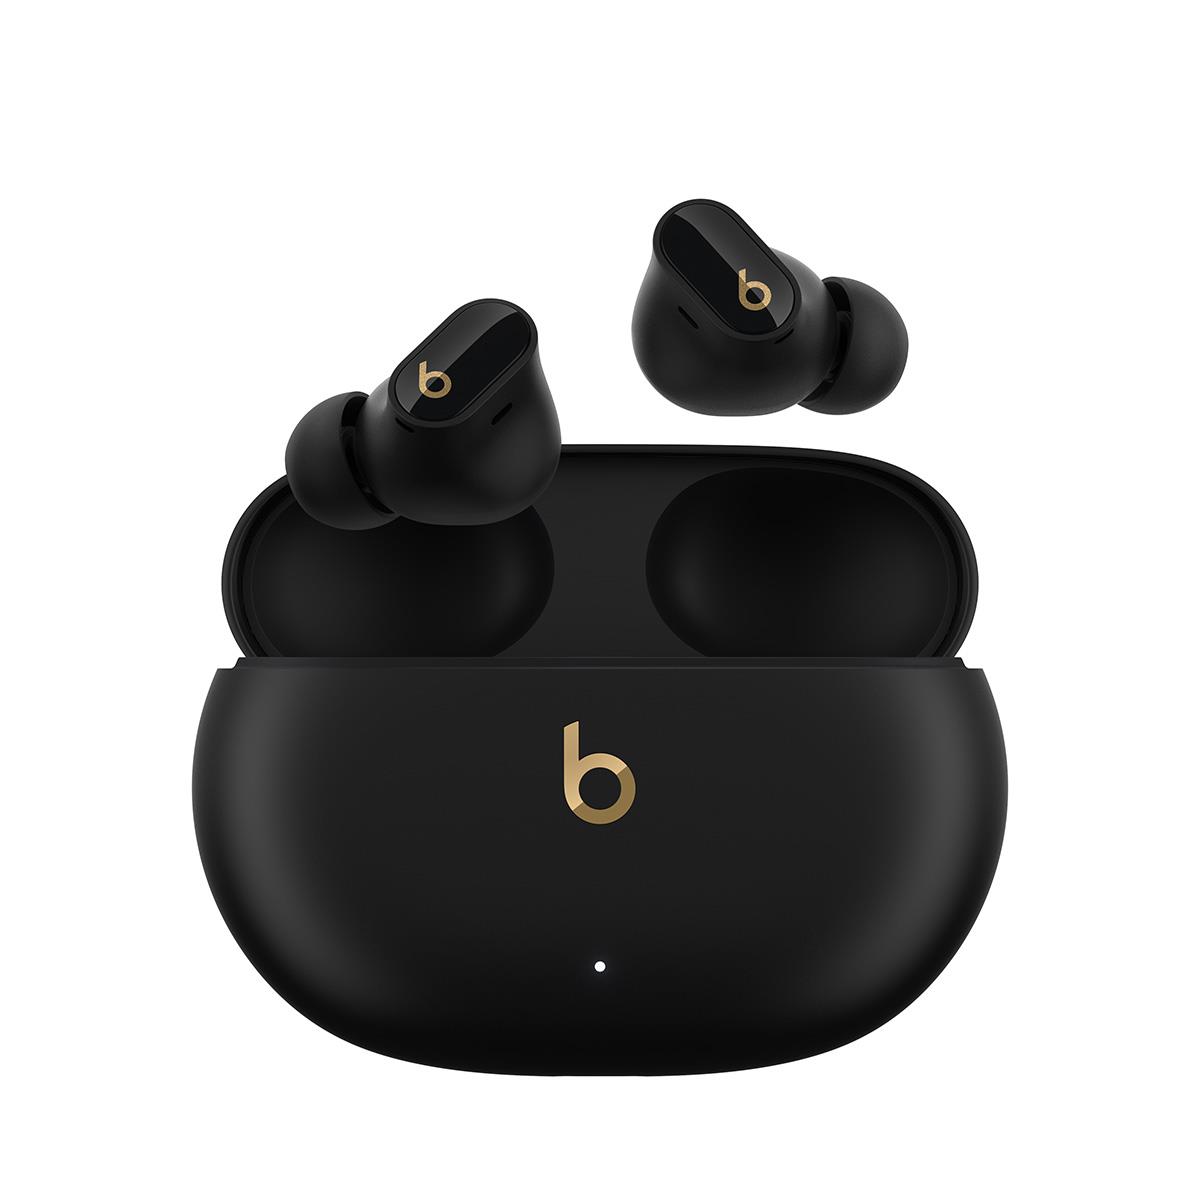 Image of Beats by Dr. Dre Studio Buds + True Wireless Noise-Canceling Earbuds Black/Gold